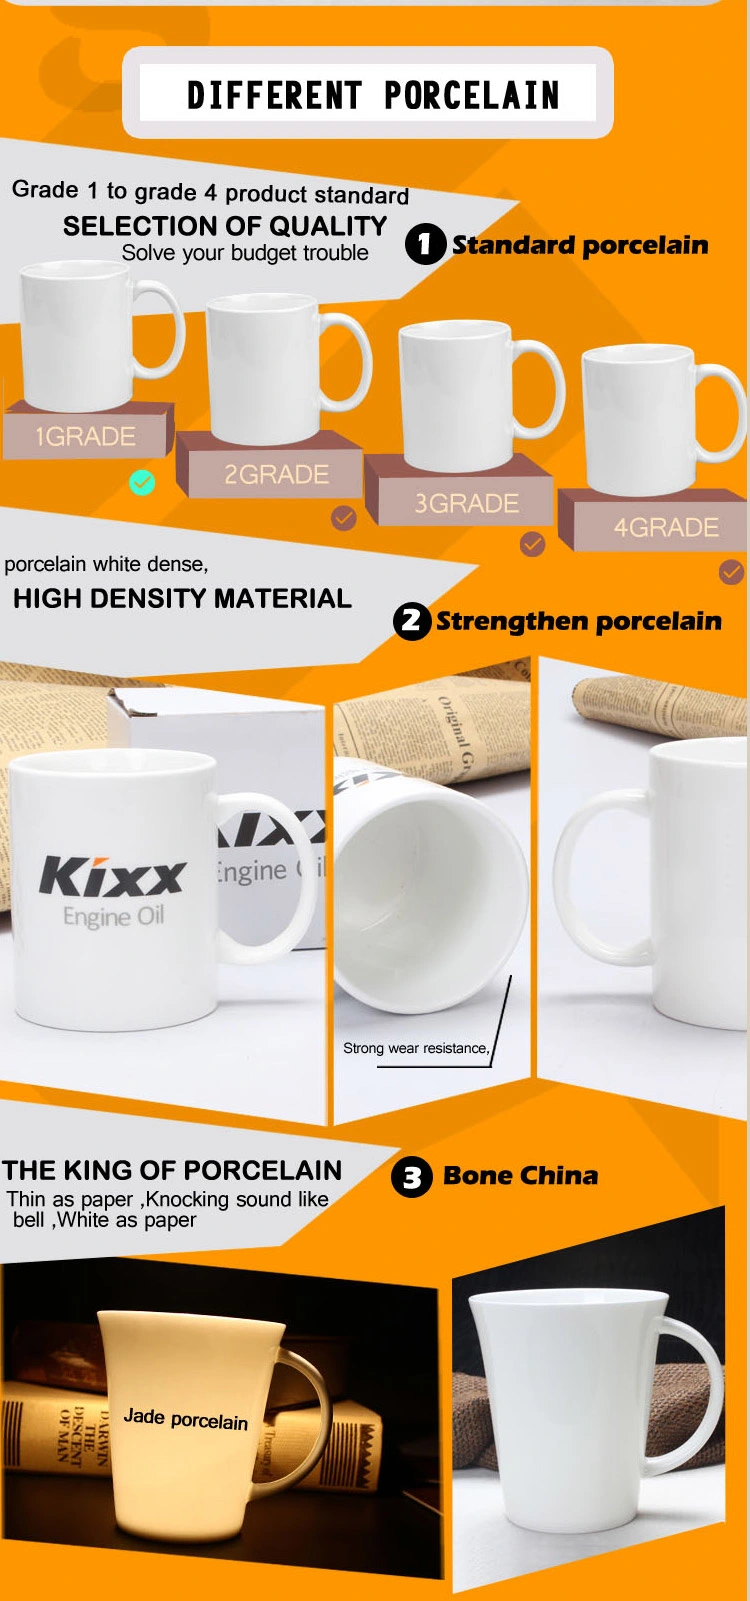 Manufacturers Produce Customized Advertising Promotion Silicone Ceramic Mug Coffee Water Cup Creative Gift Thermos Cup